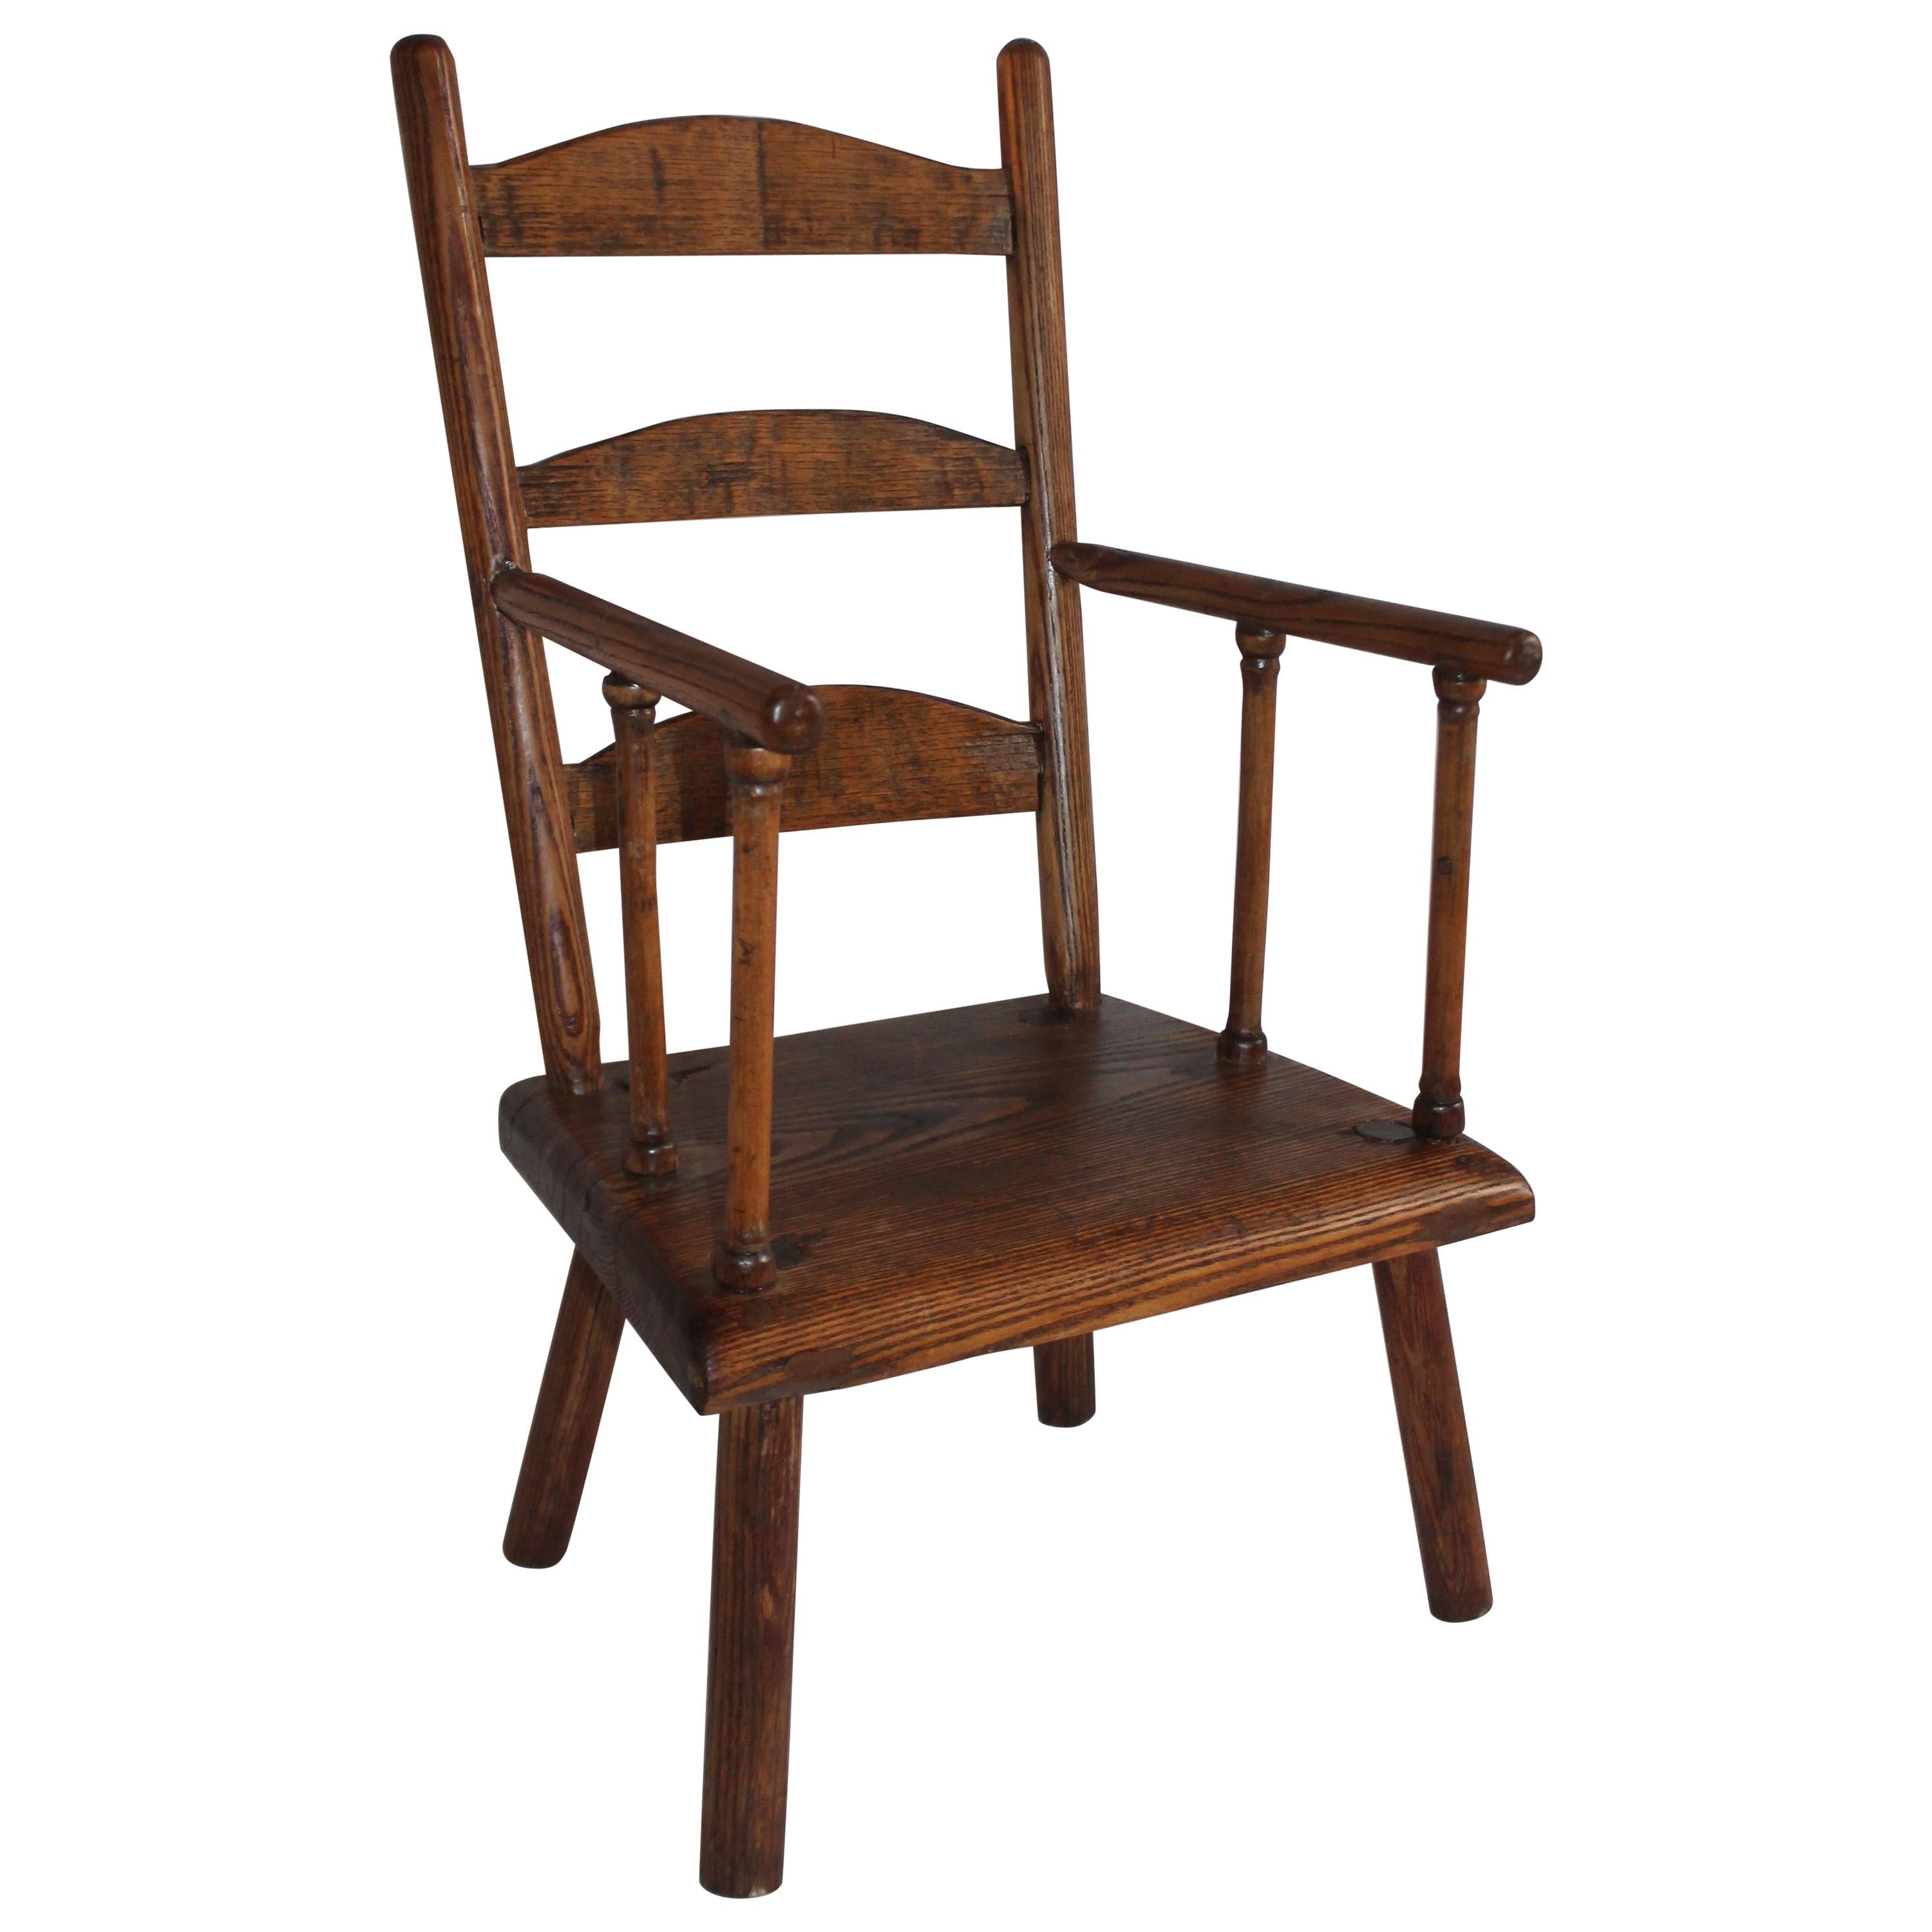 Early 19th Century New England Child's Chair